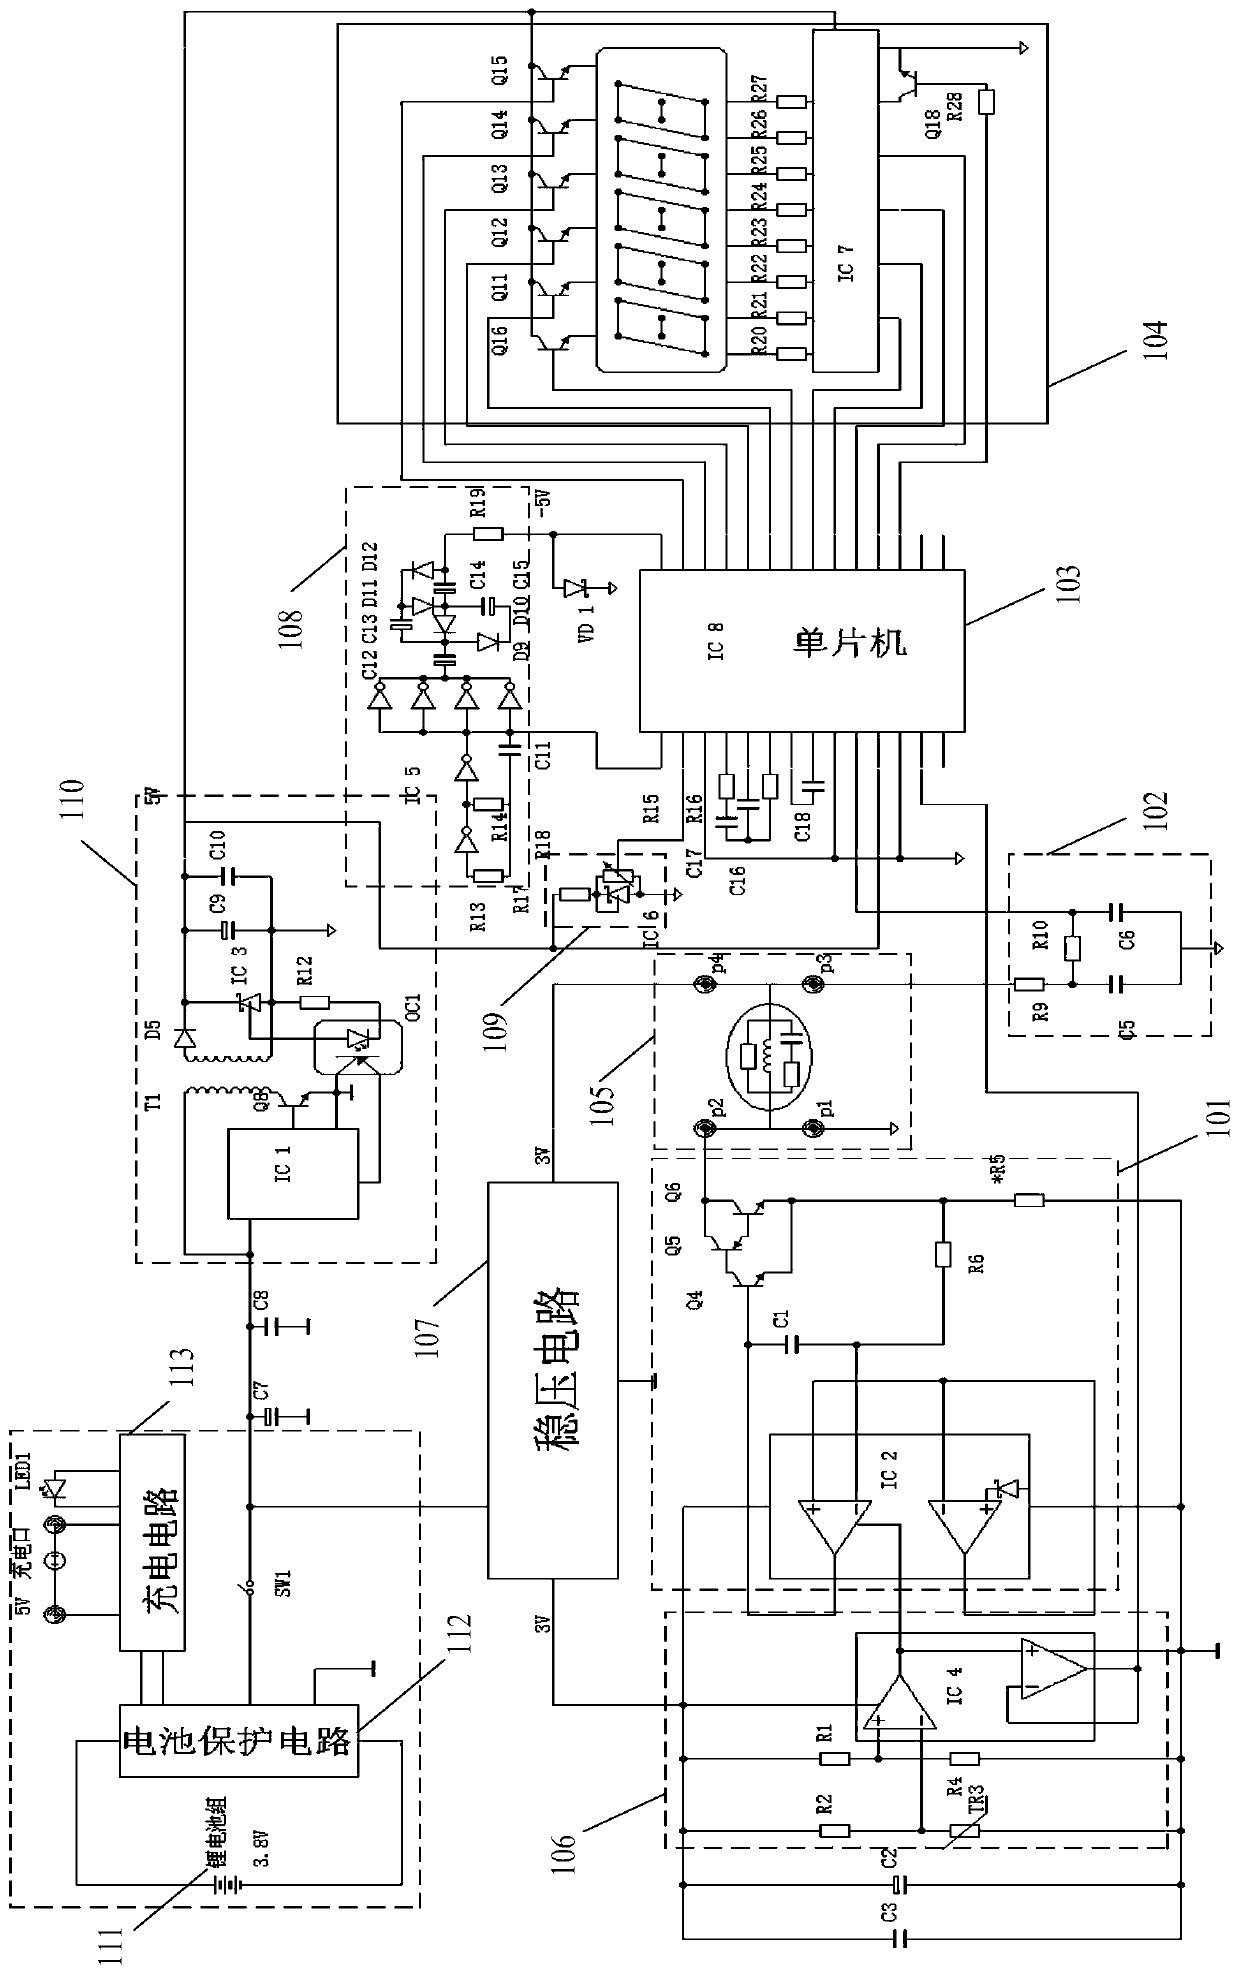 Motor winding resistance measuring device and instrument